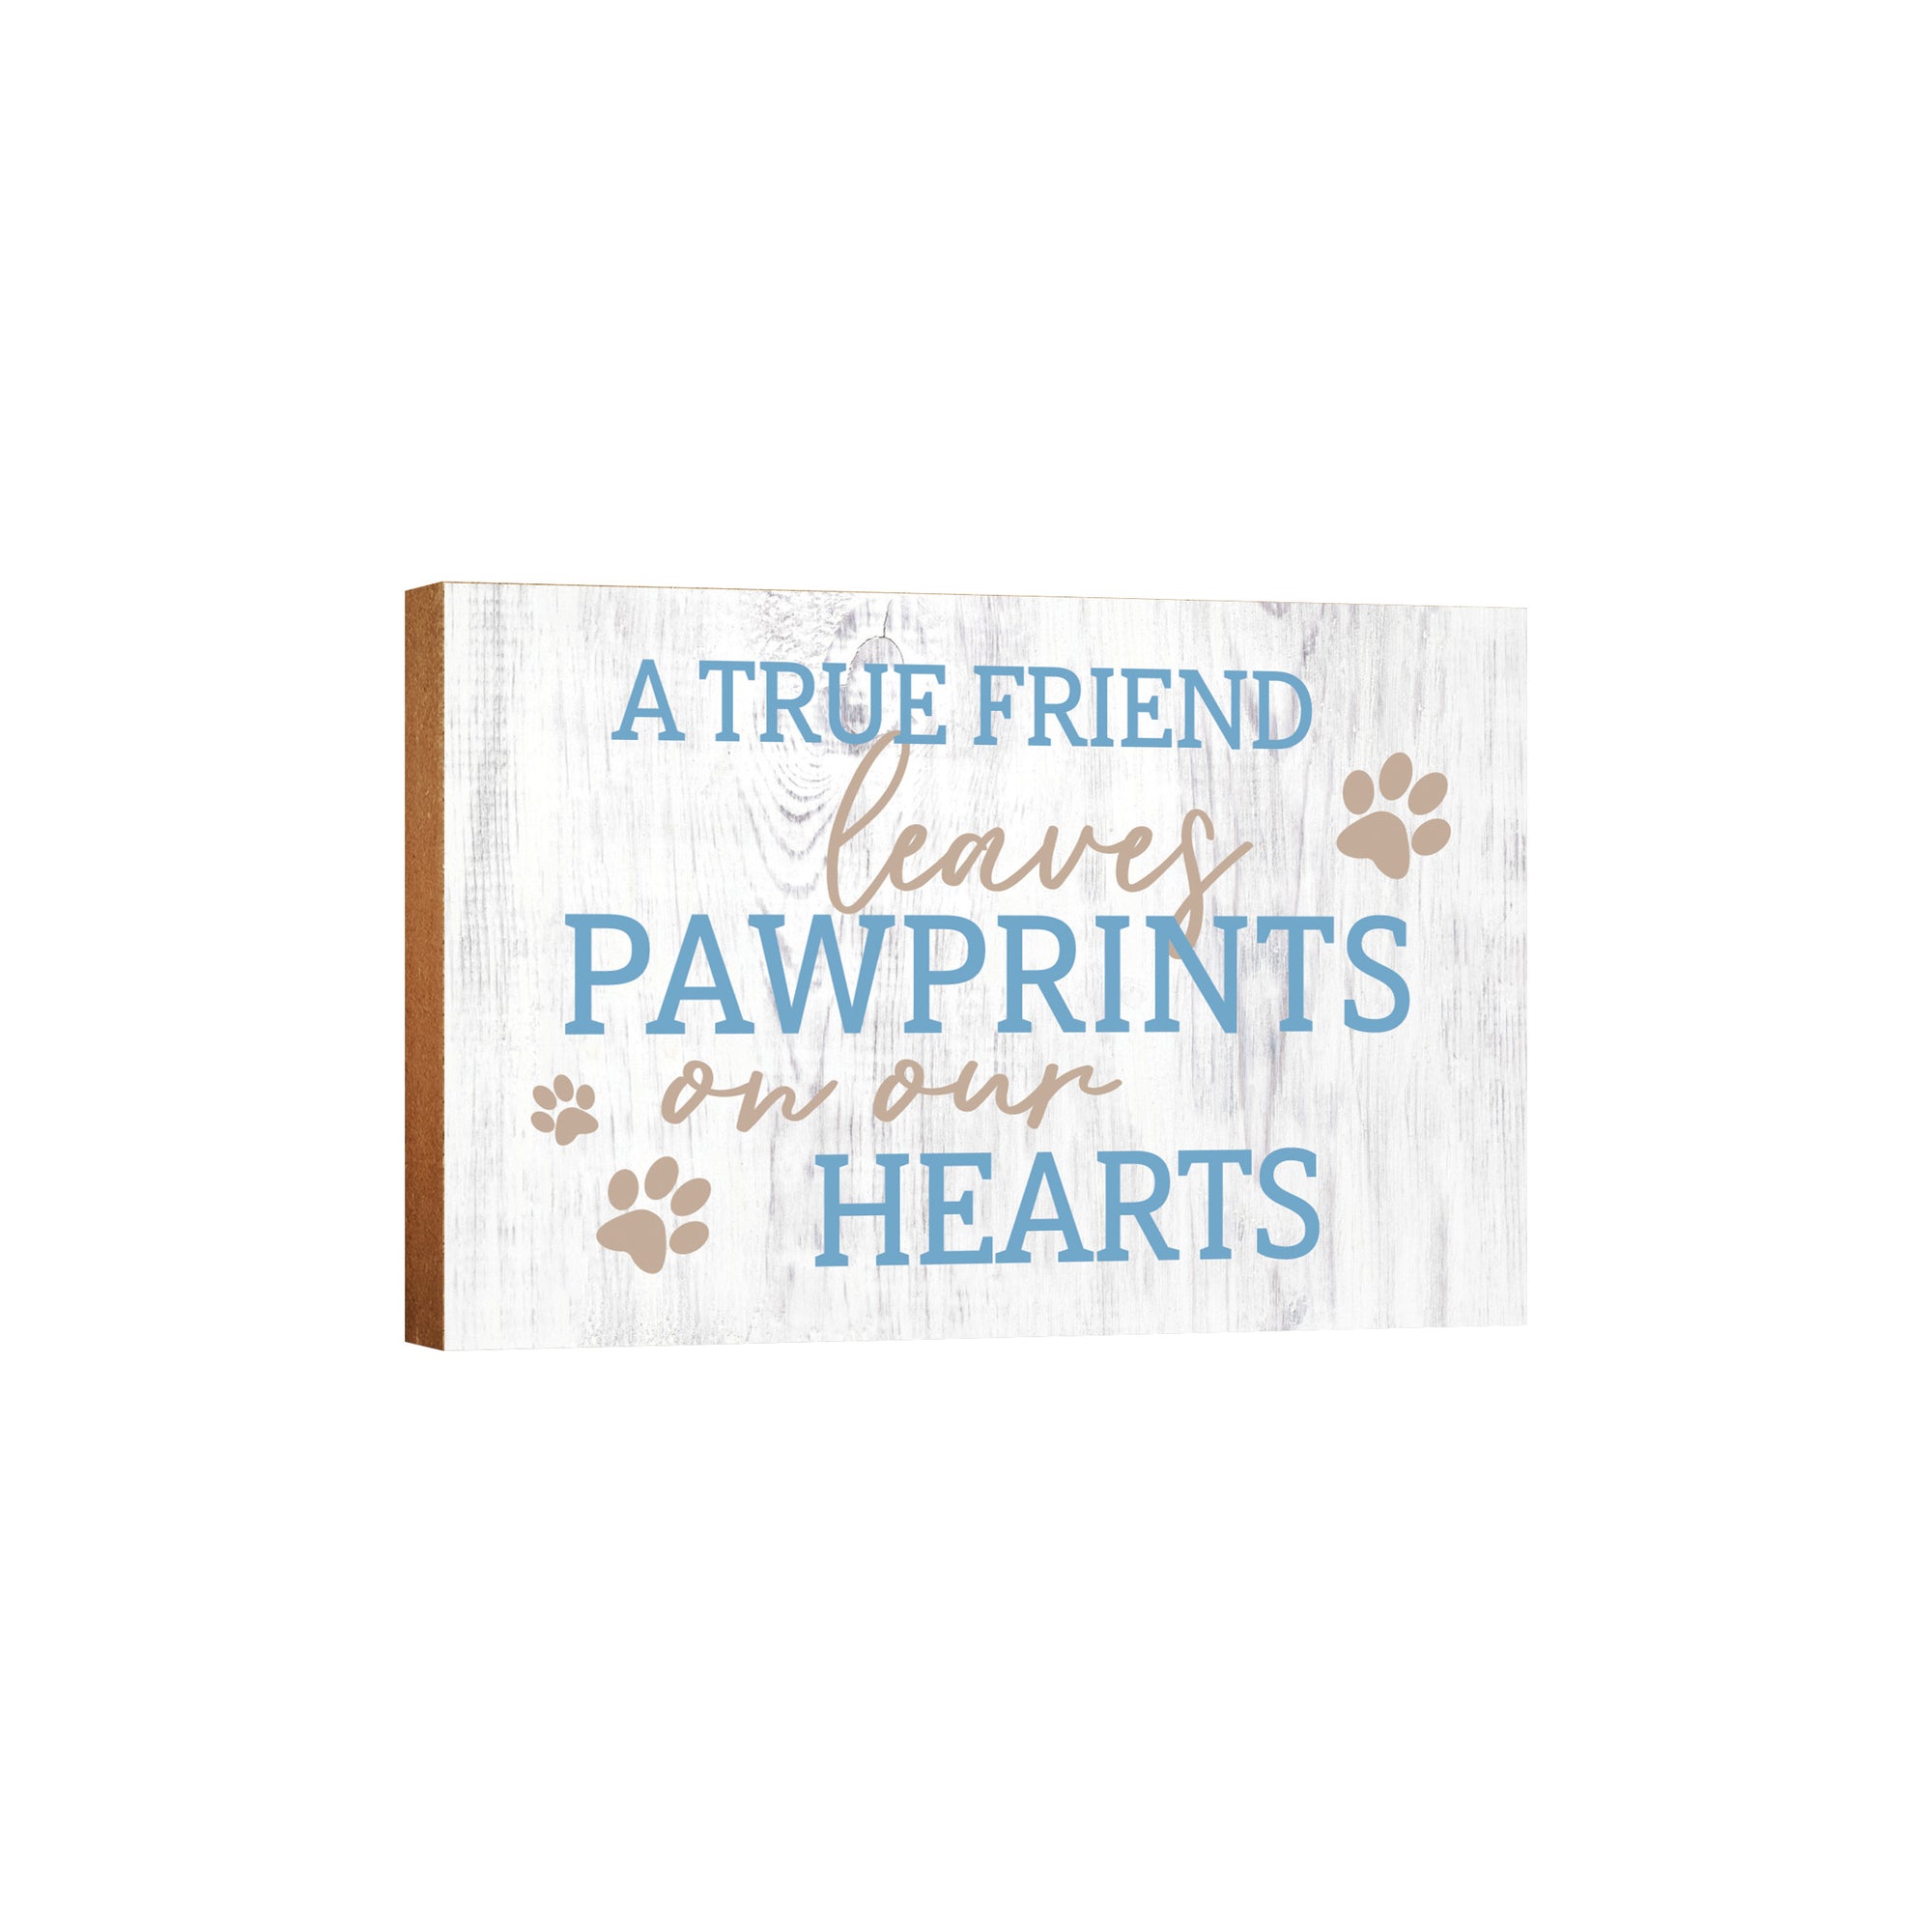 Wooden Shelf Decor and Tabletop Signs with Pet Verses - A True Friend